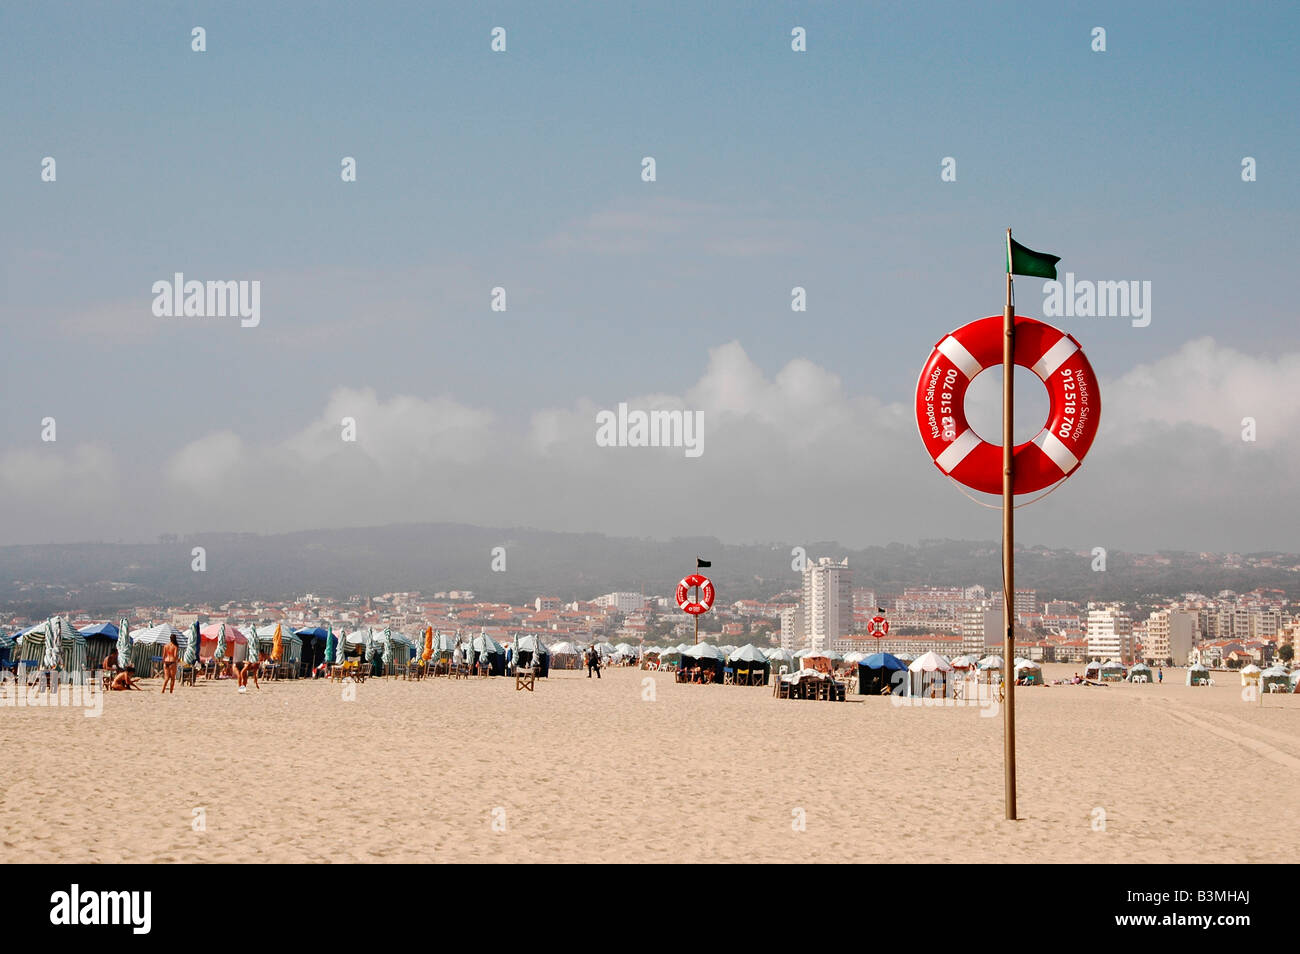 Beach tents and sands of Figueira da Foz,Portugal, with the townscape in the background Stock Photo